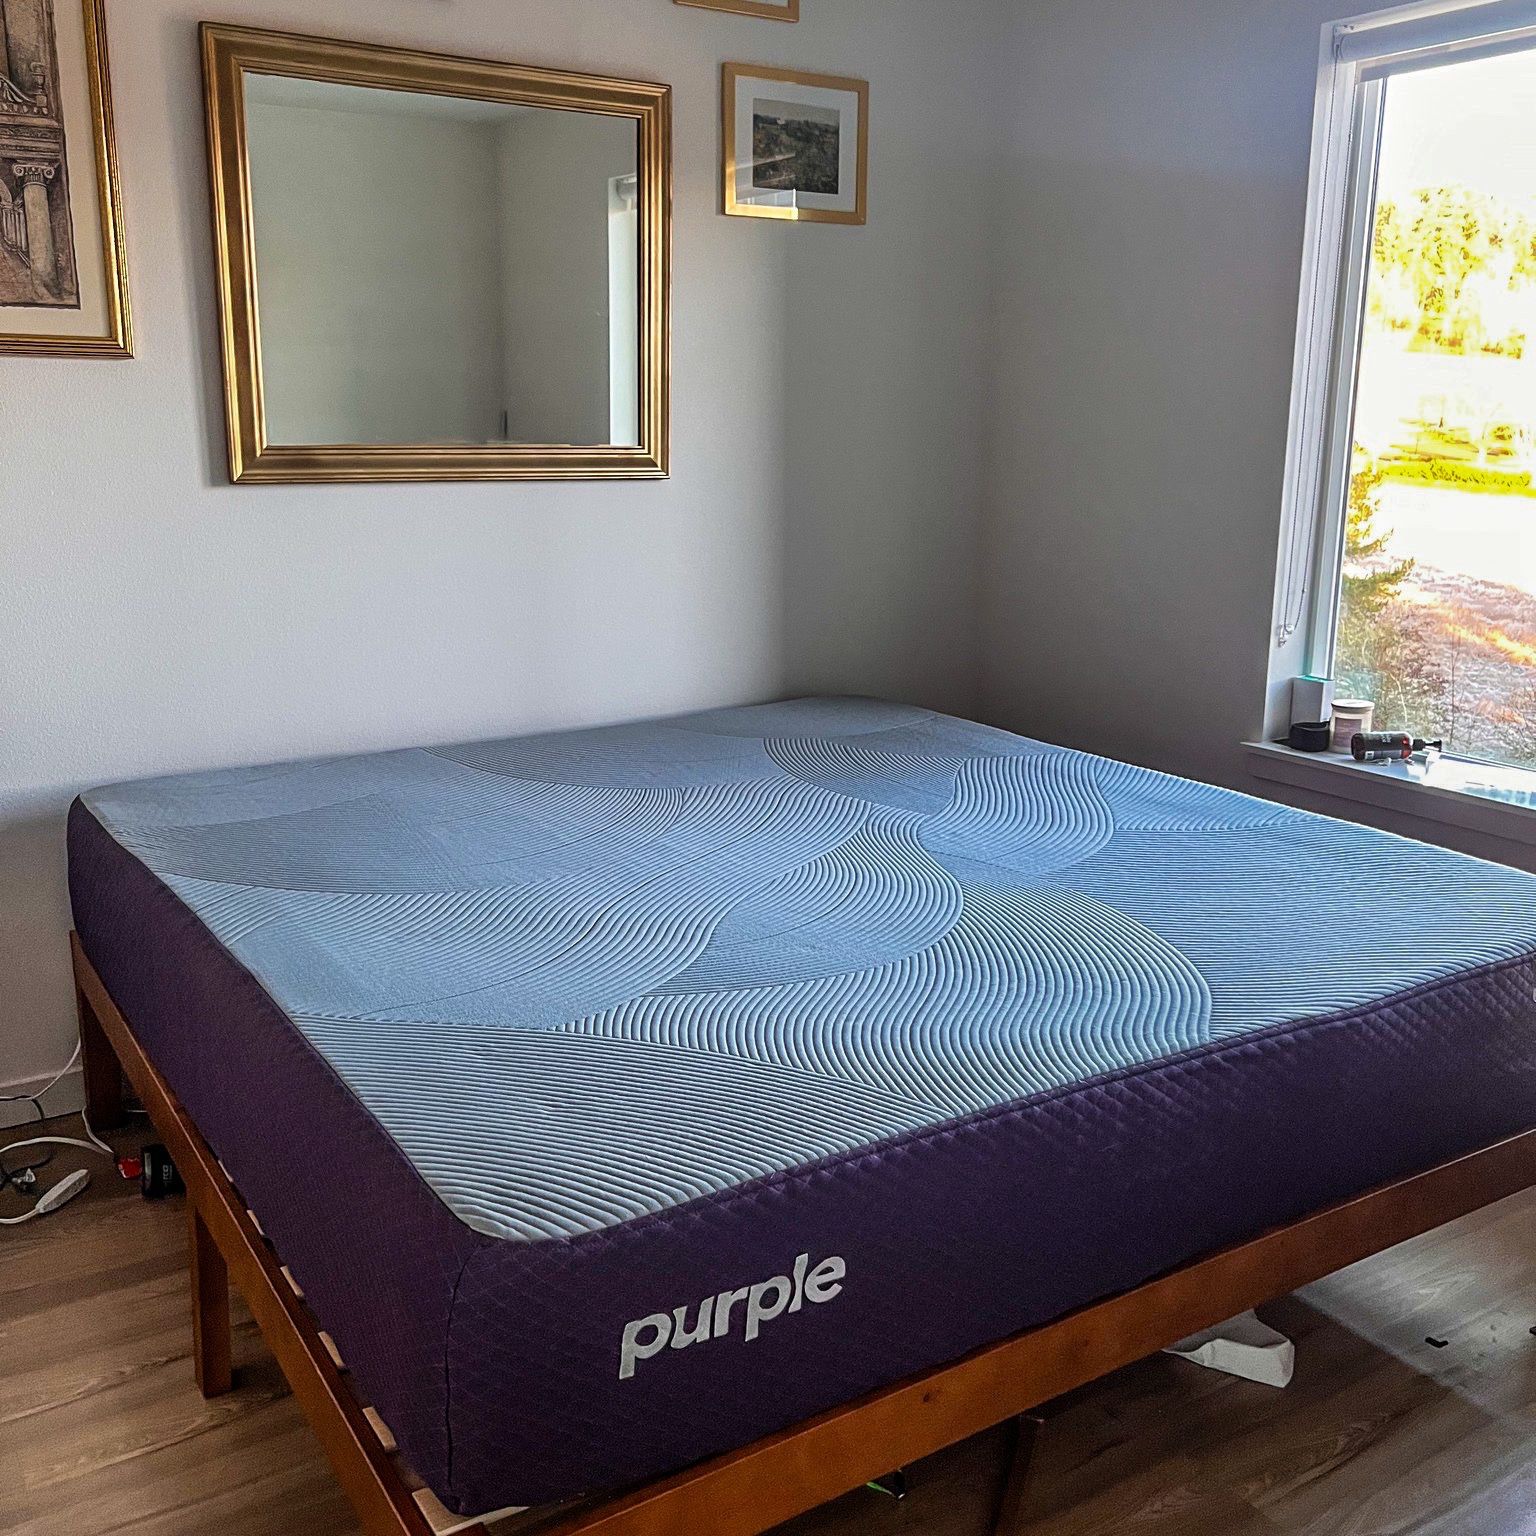 New Queen Mattress, Purple Brand, Like New, Perfect Condition